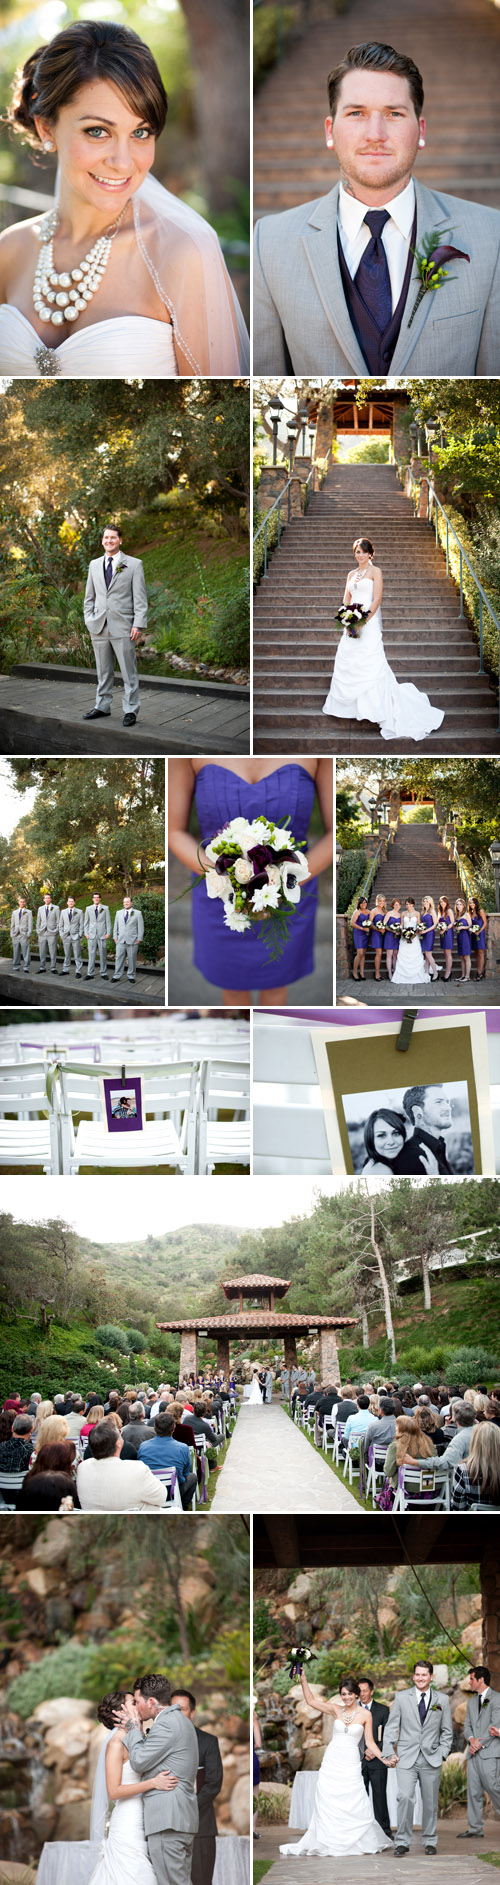 organic purple and moss green outdoor wedding style at the Pala Mesa Resort in Fallbrook, CA, photos by Acres of Hope Photography